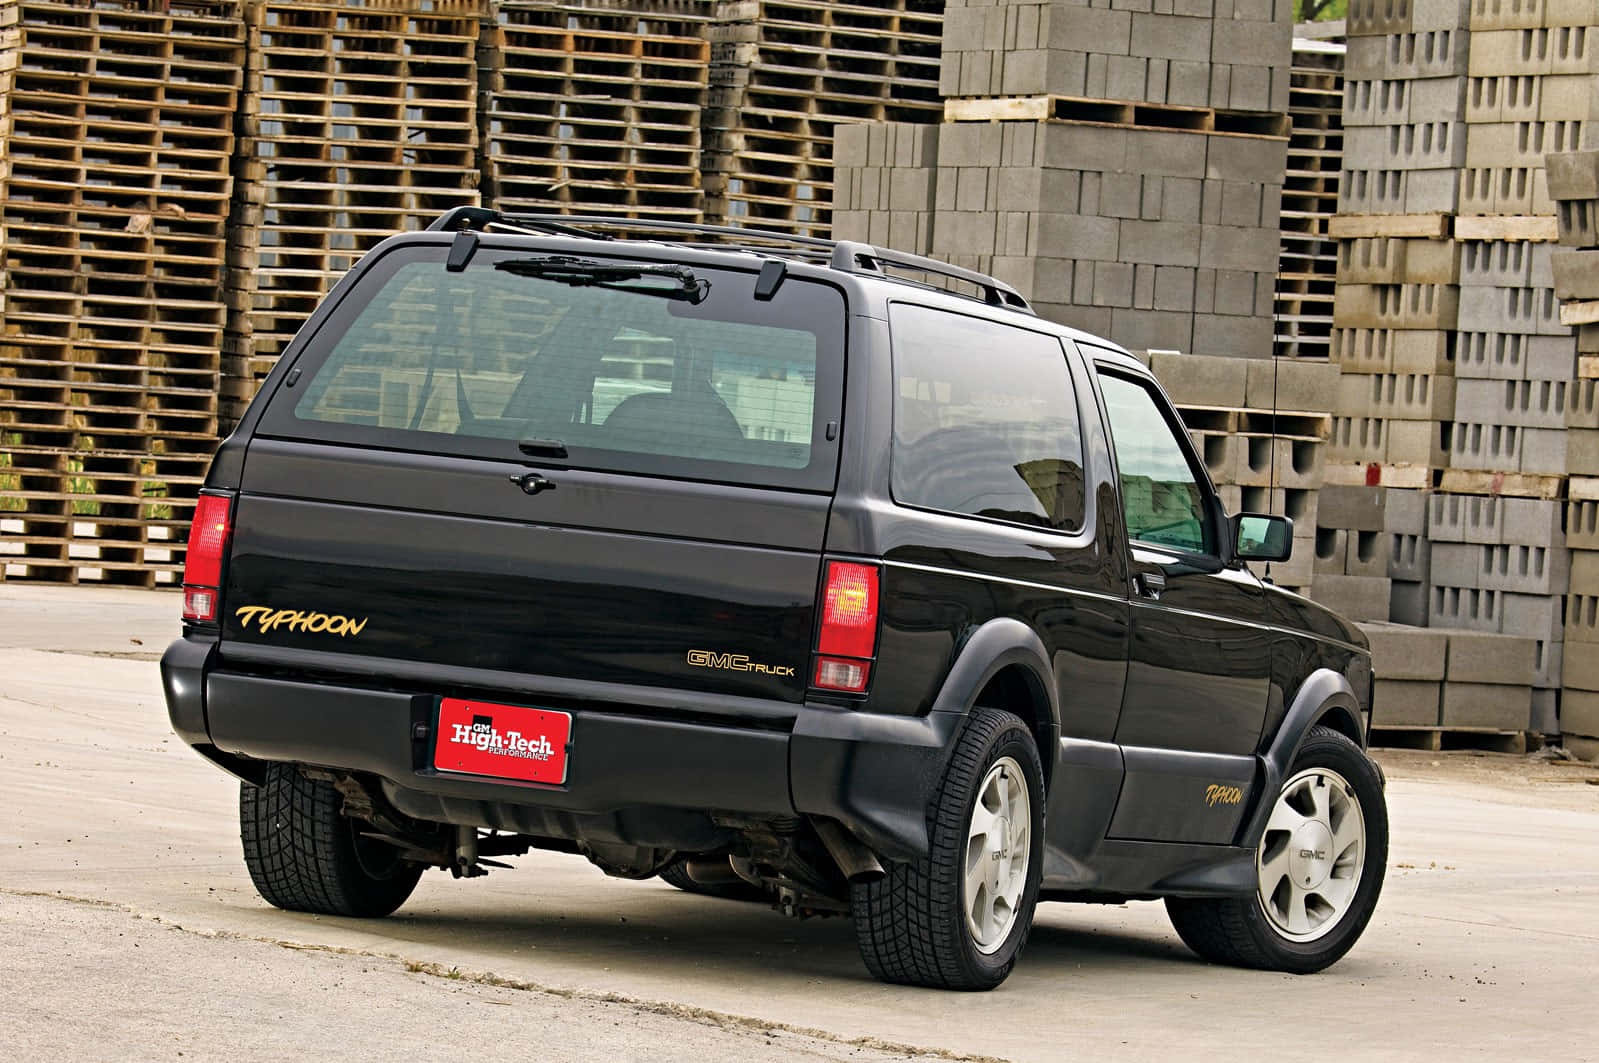 A powerful GMC Typhoon cruising on the road. Wallpaper